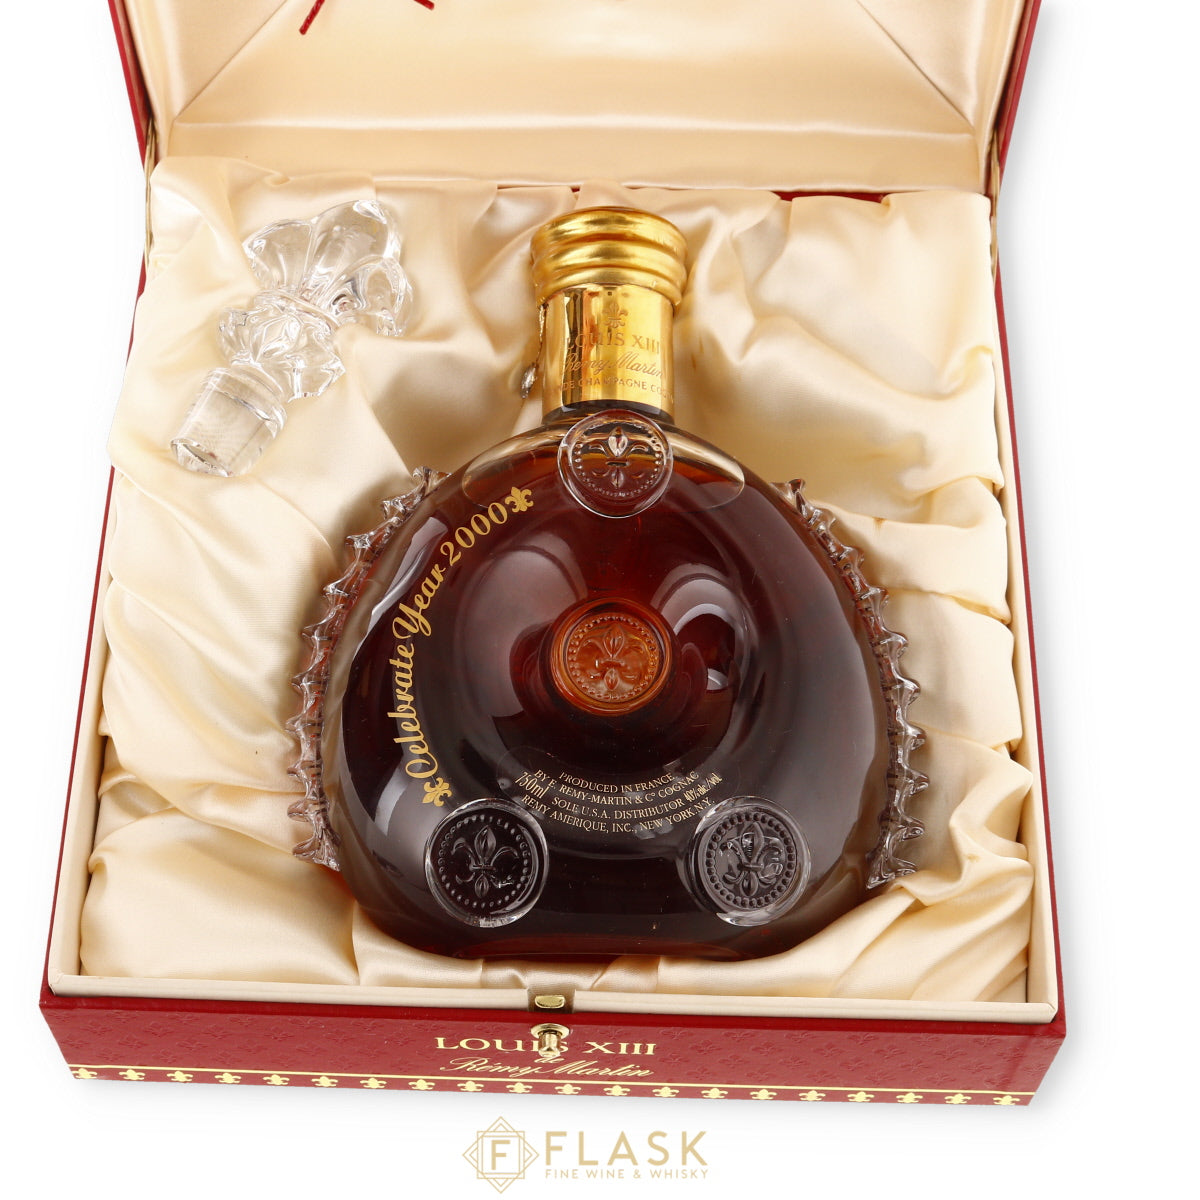 I Have An Empty Louis XIII De Remy Martin Grande Champagne C